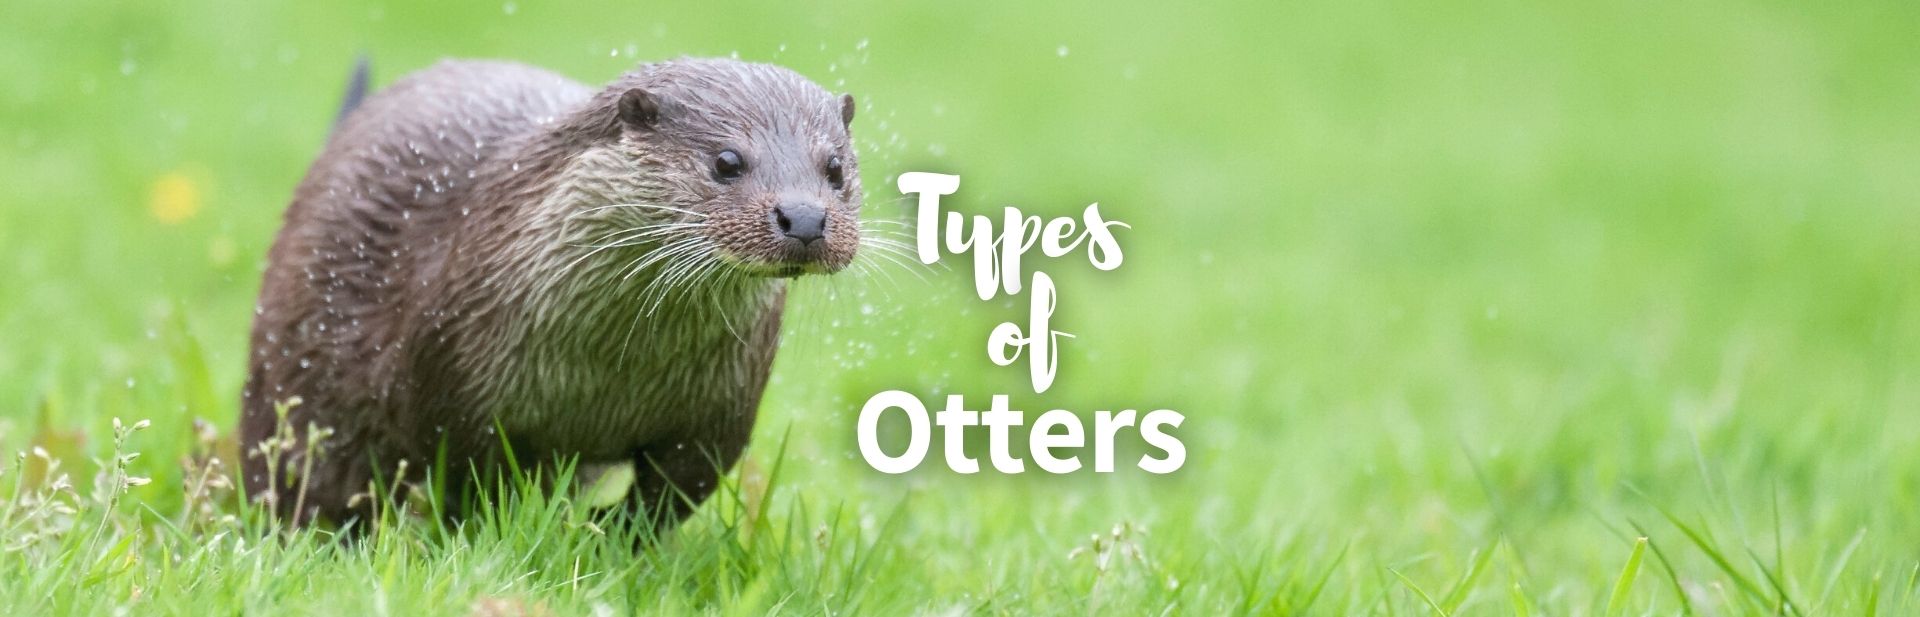 13 Types Of Otters And Where They Live: With Facts and Images